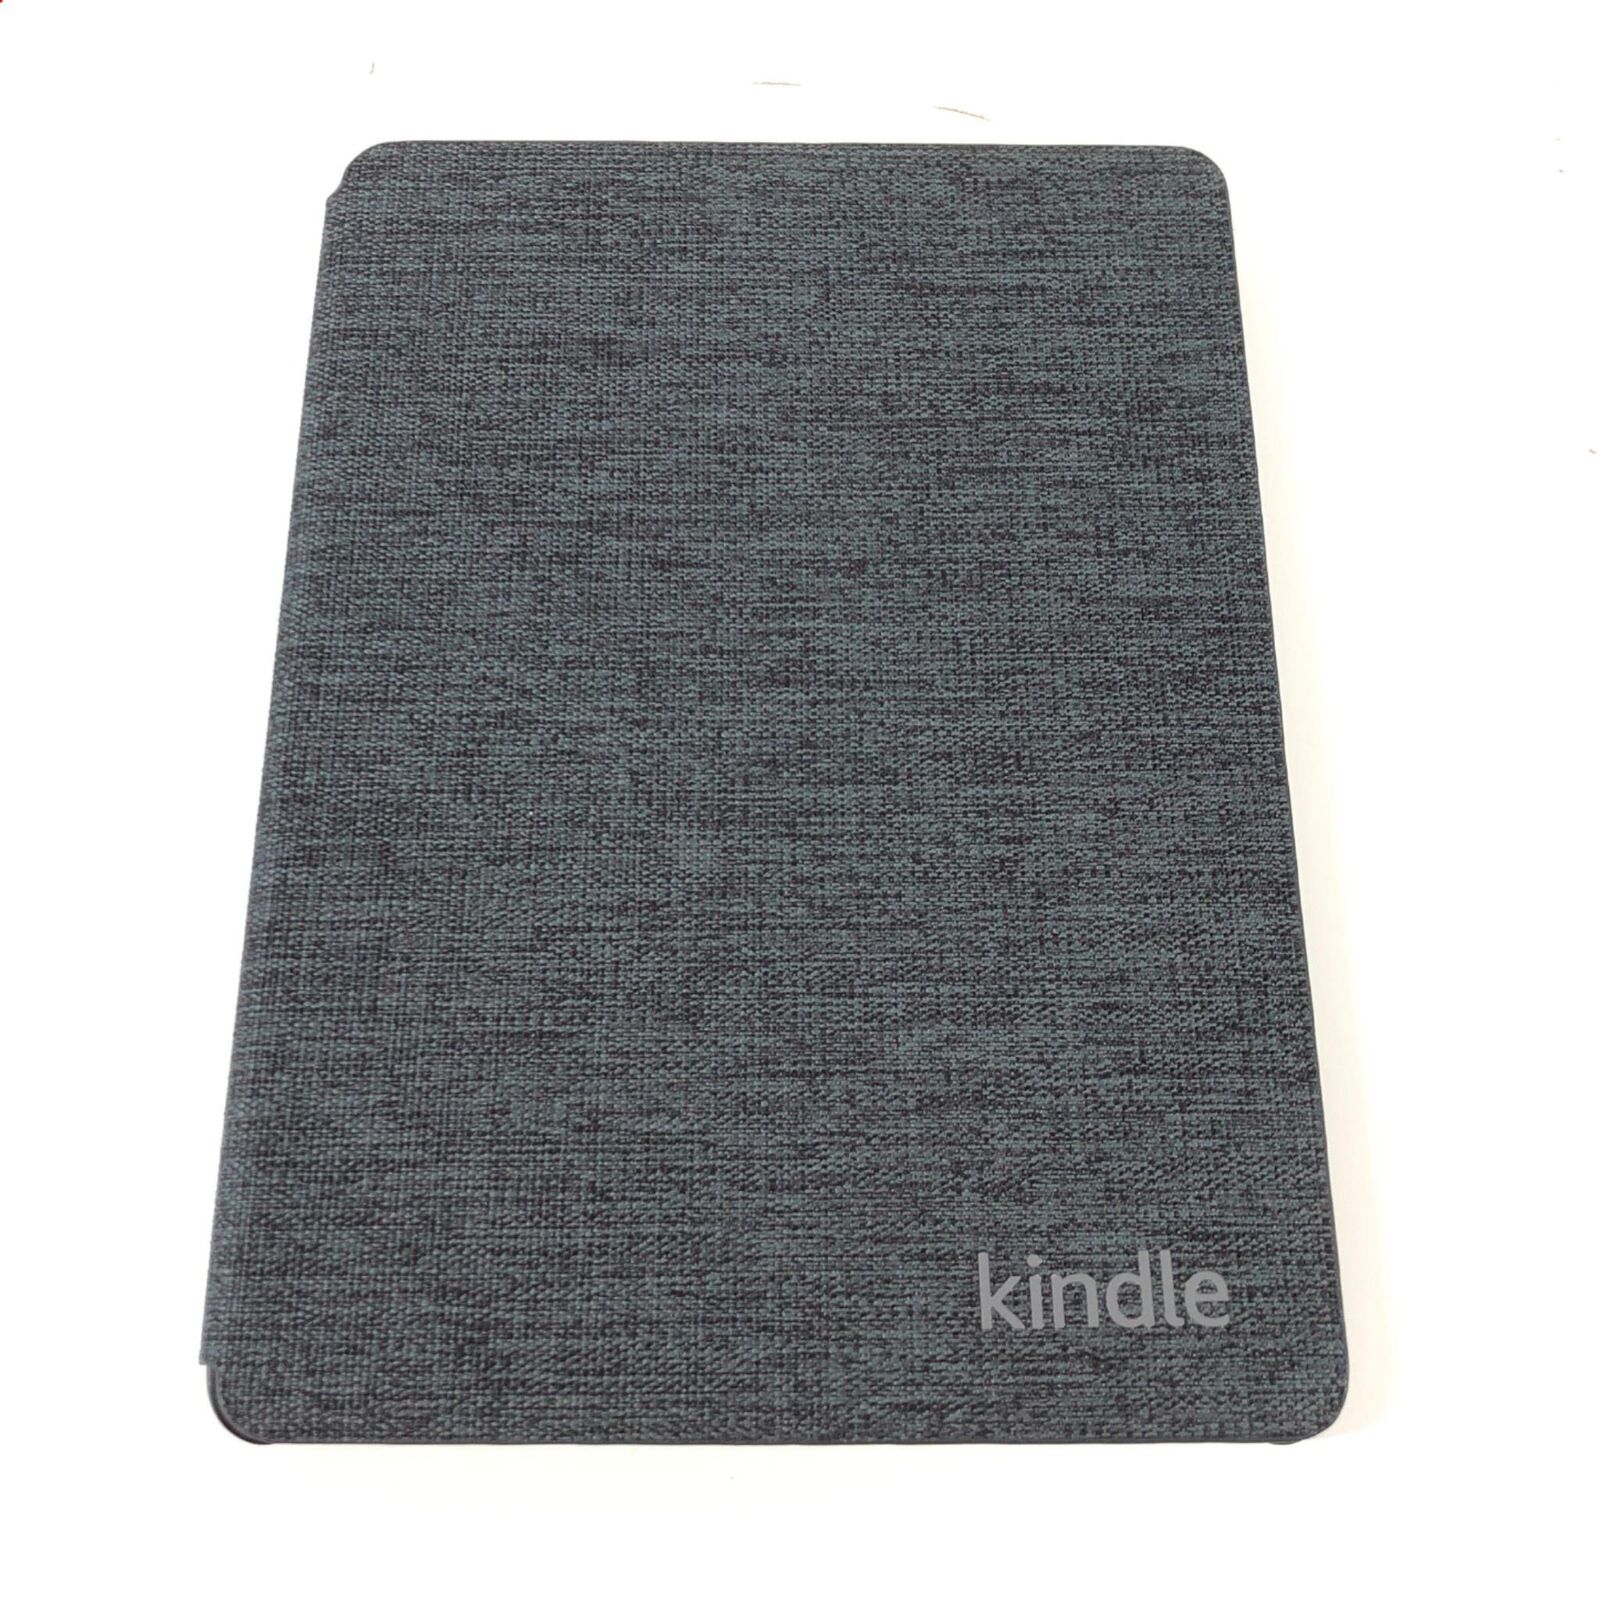 Genuine OEM Amazon Kindle 11th Generation Case Cover - Gray